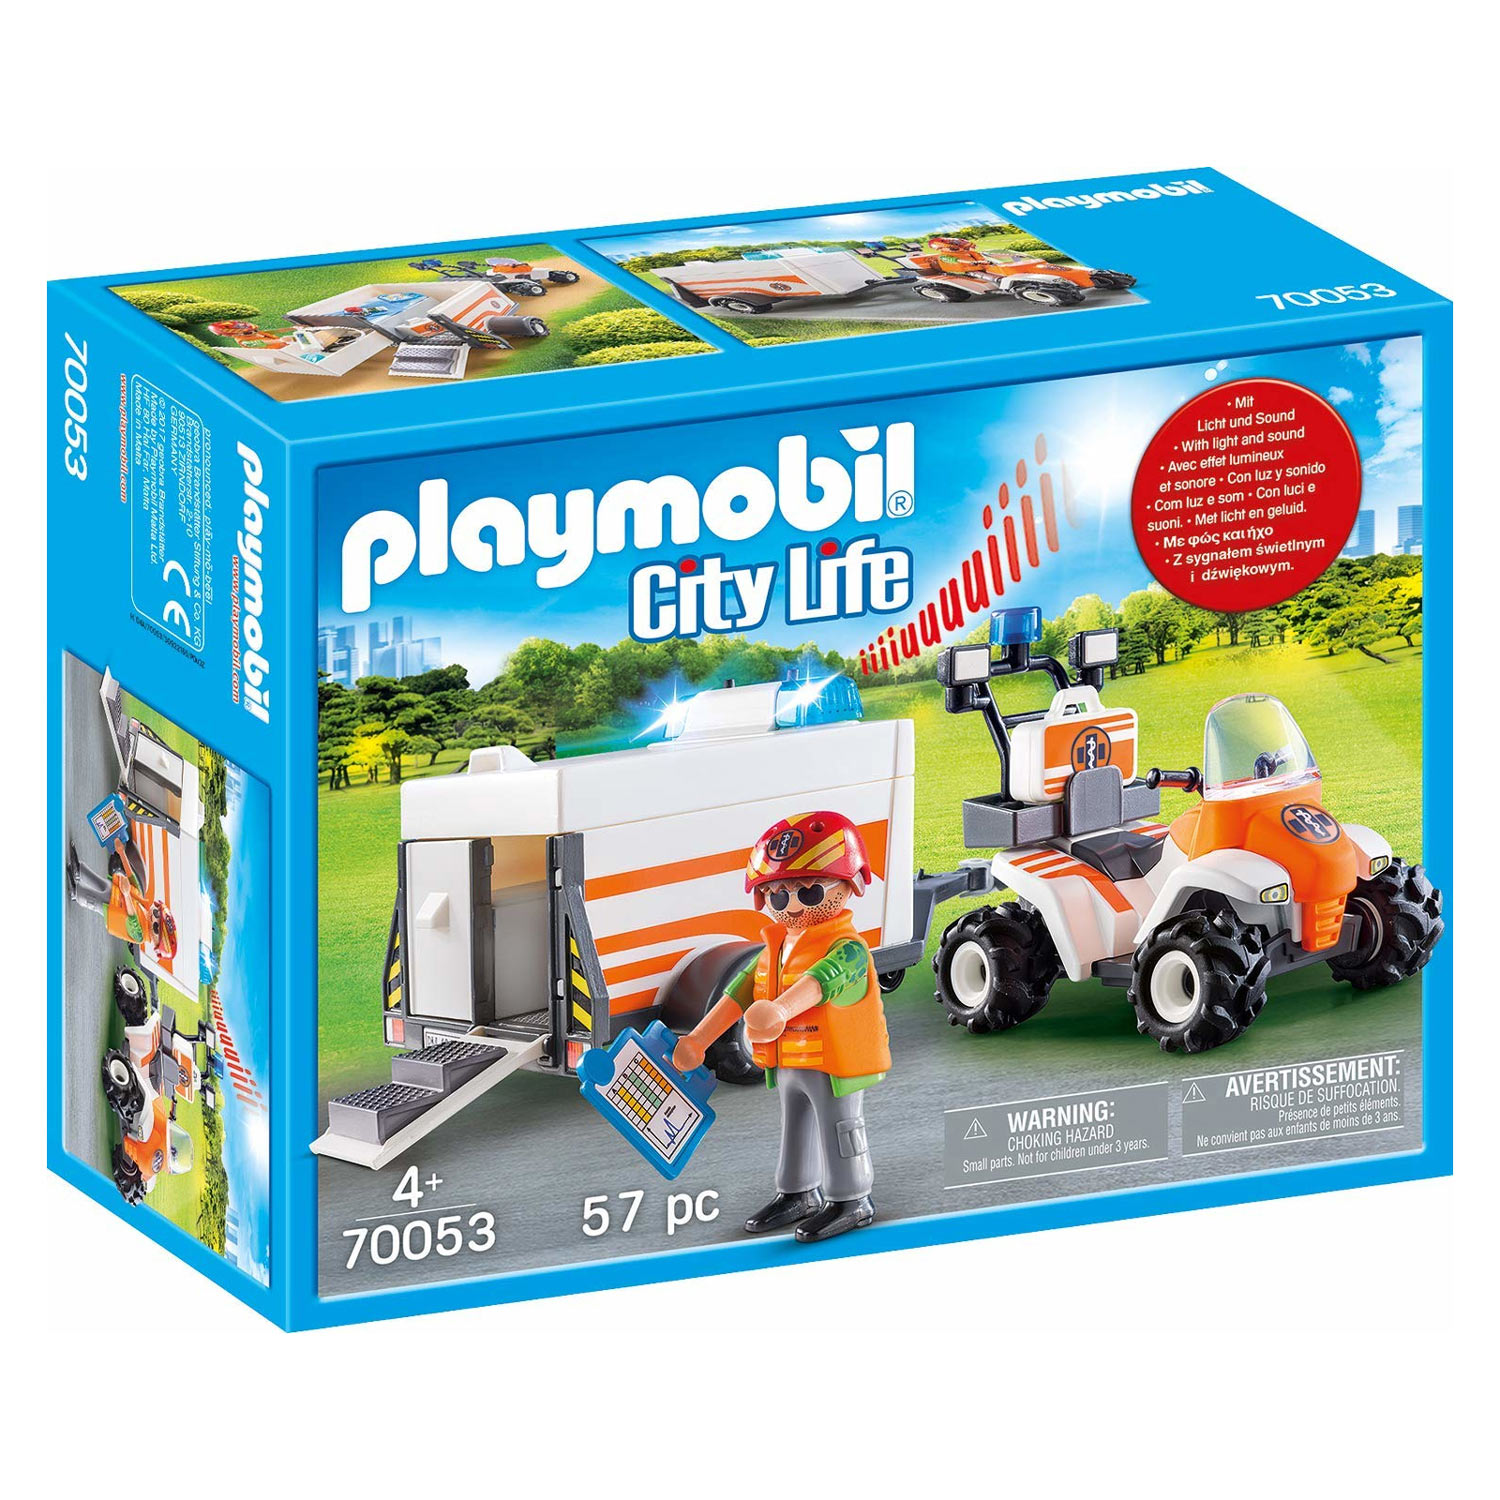 Playmobil City Action - Fire Department - Speed Quad - 71090 - 2